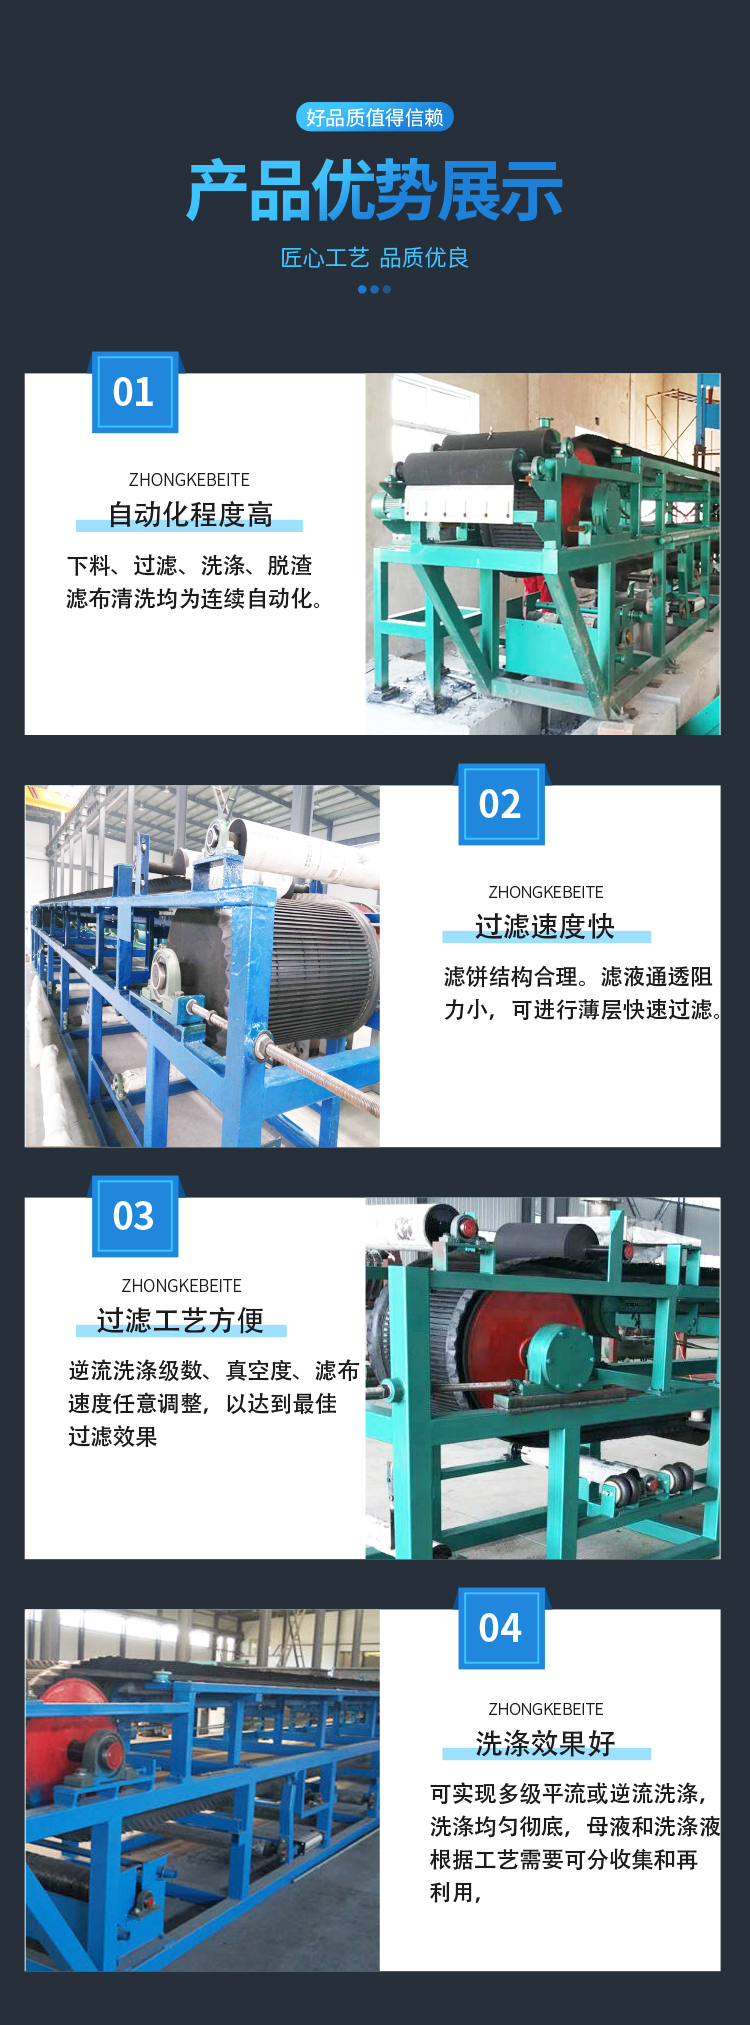 Selected tailings belt vacuum filter, fly ash dewatering treatment equipment, continuous automatic belt filtration equipment